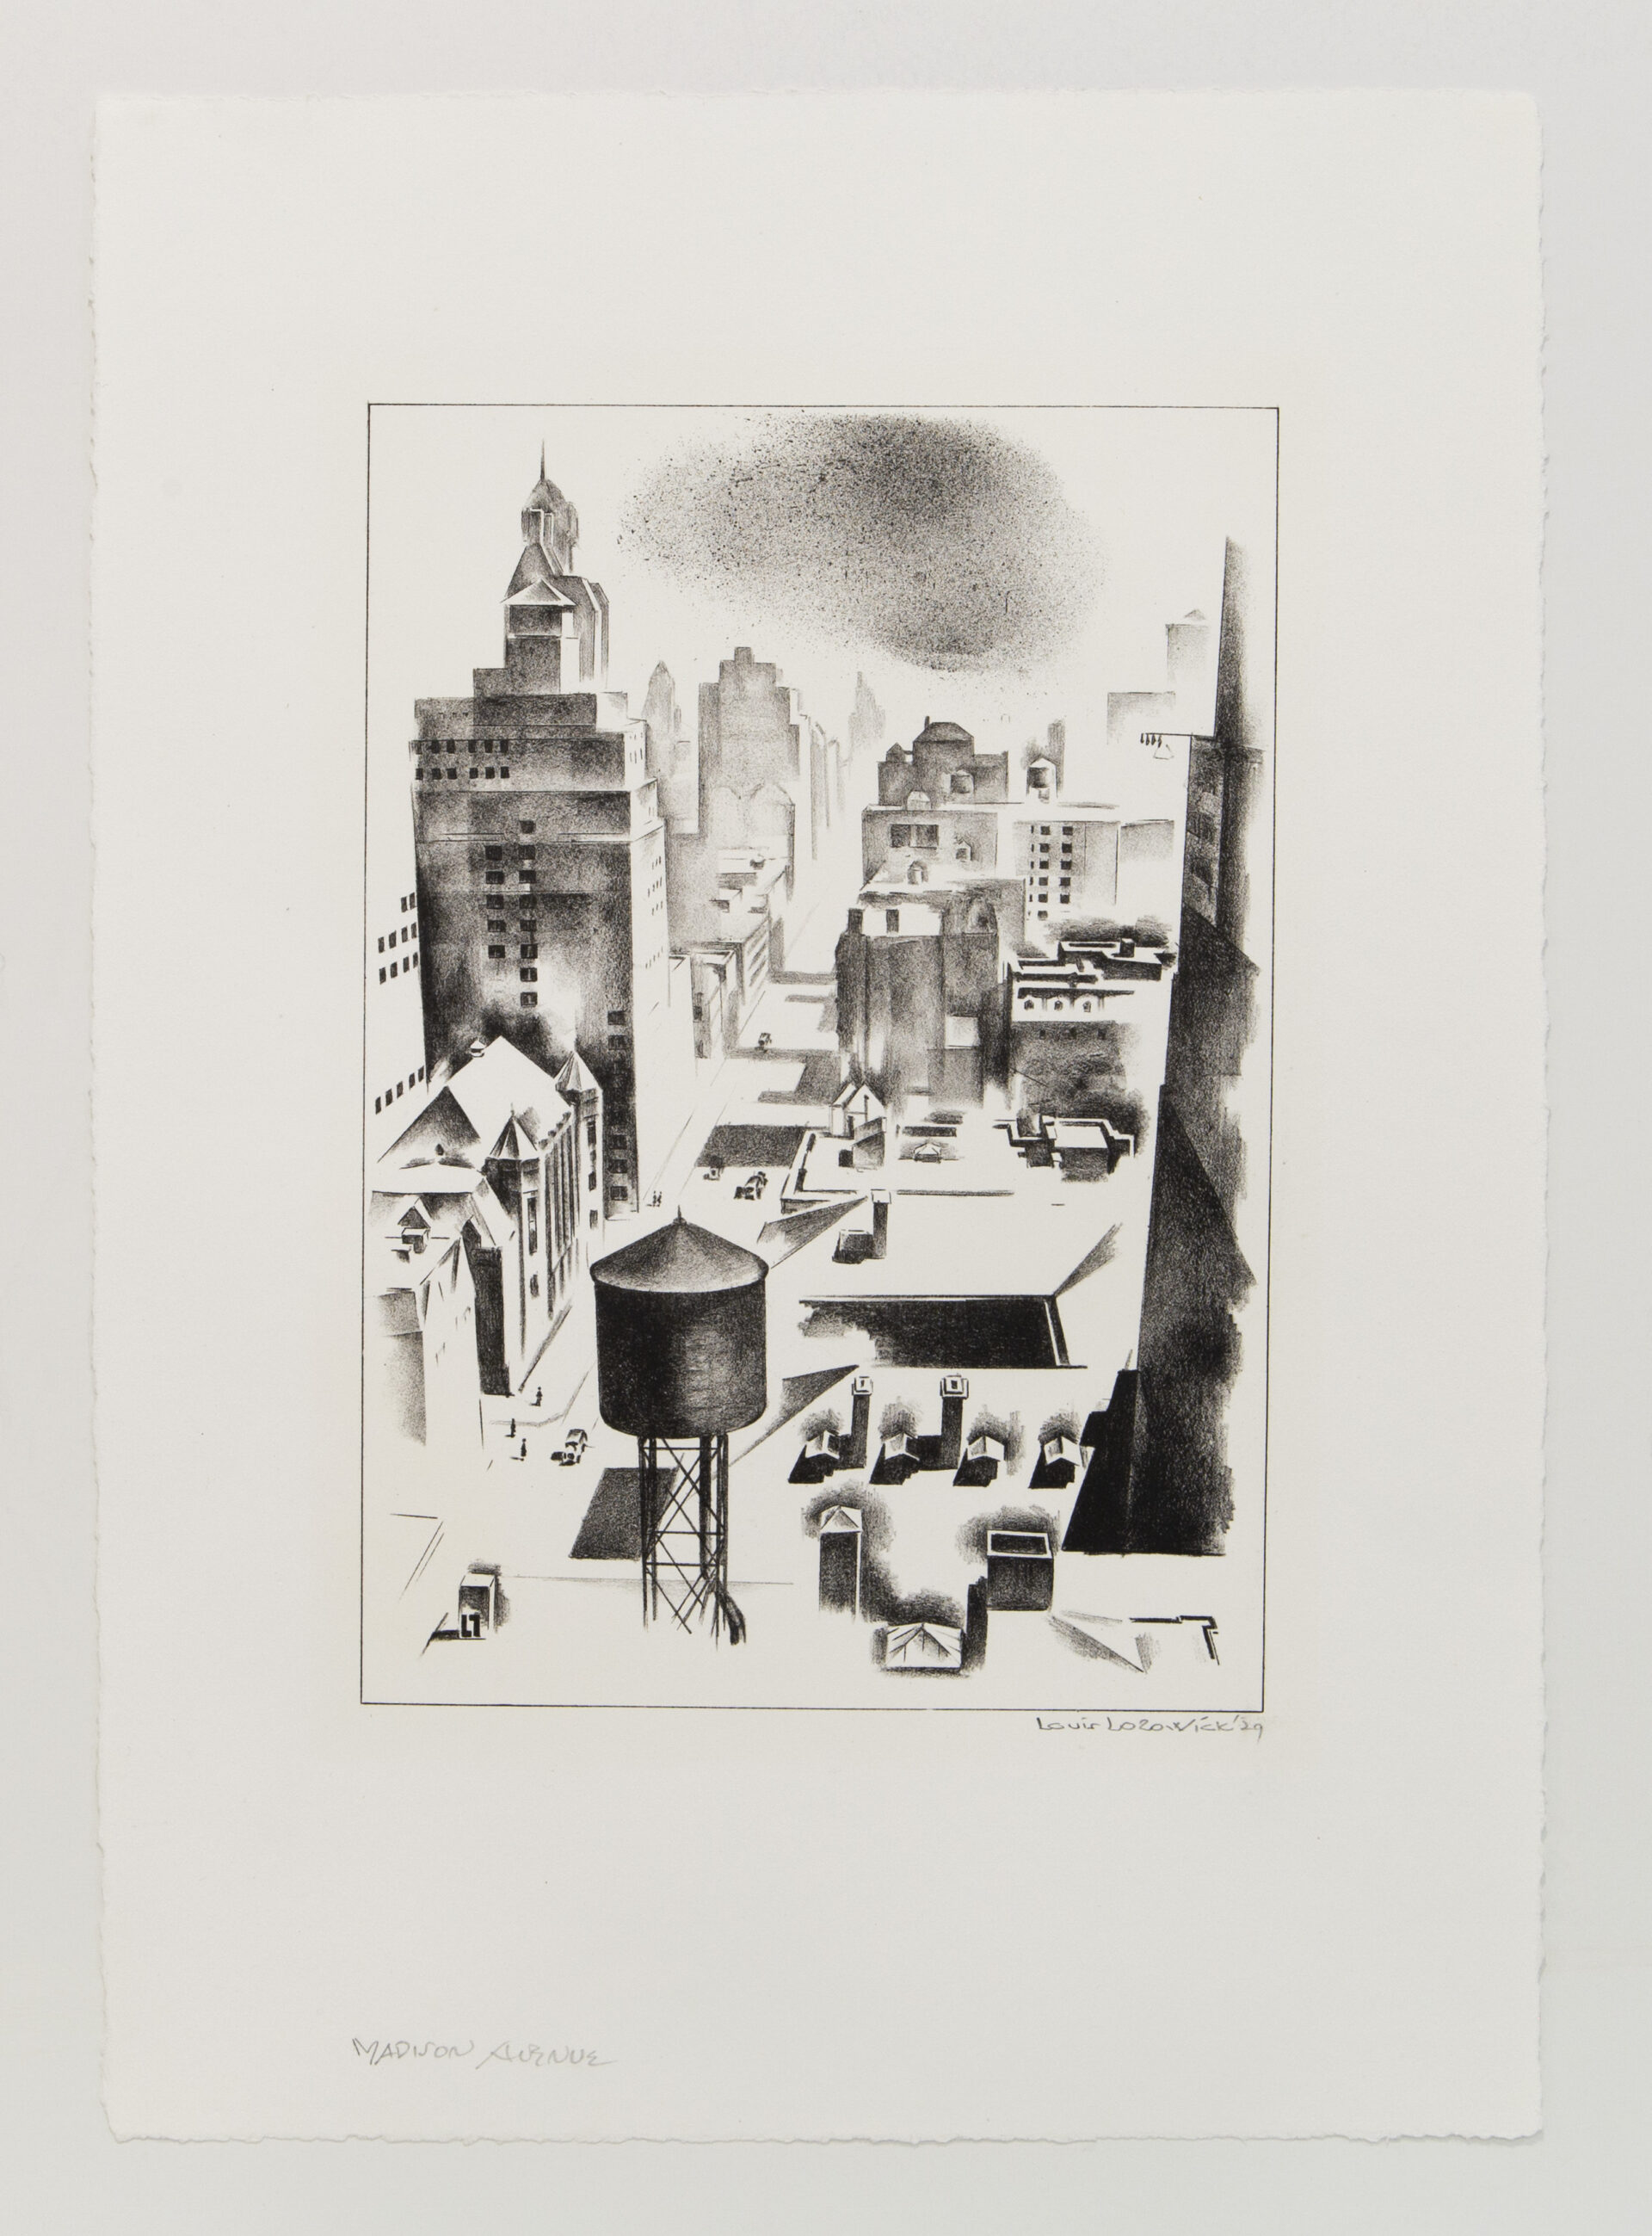 Louis Lozowick Madison Ave, 1929 Lithograph 20 1/4 x 14 1/4 inches (51.4 x 36.2 cm) Edition of 15